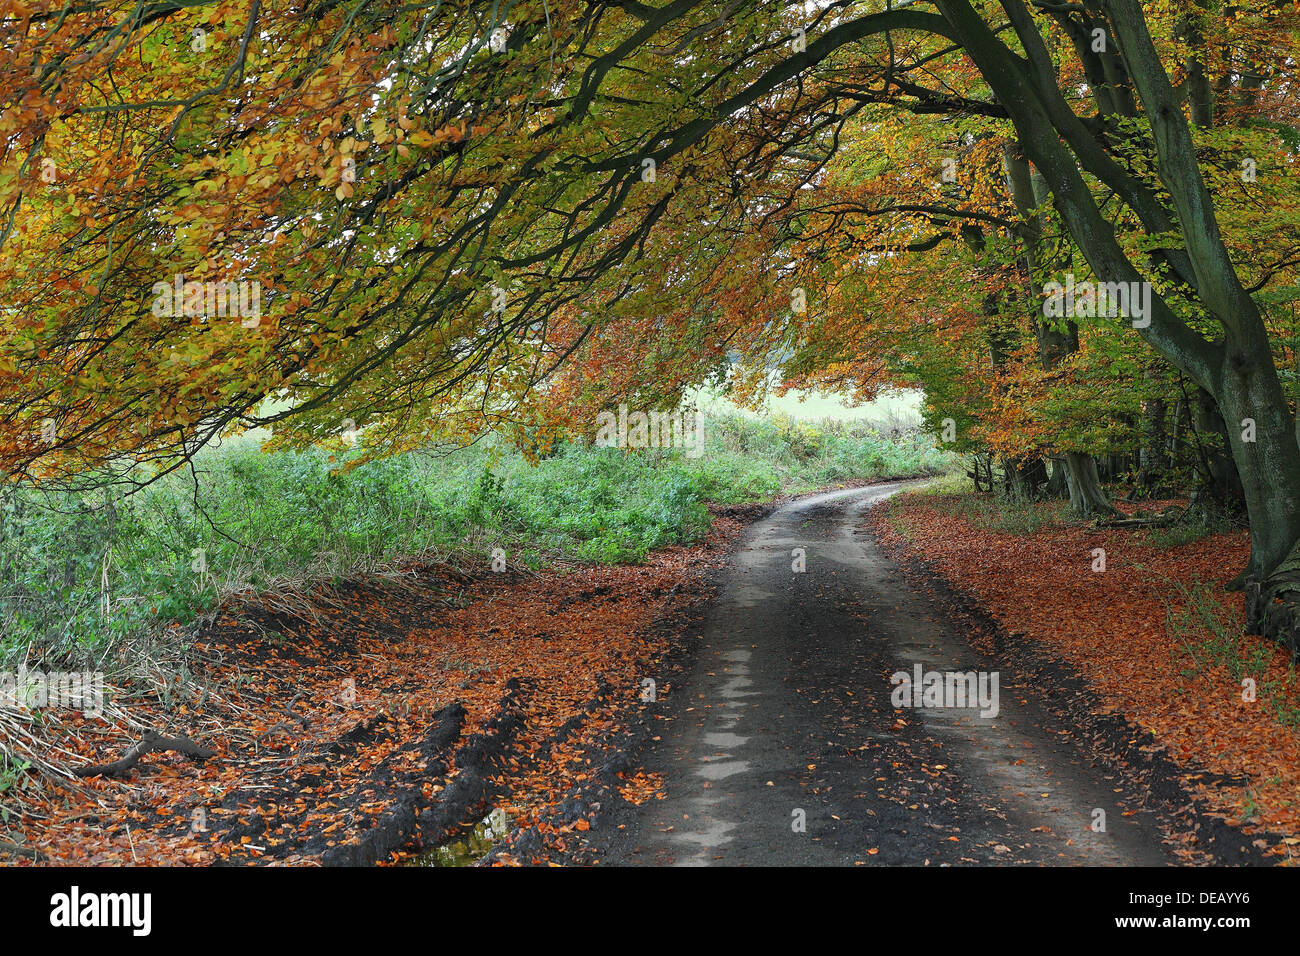 Autumn scene along a quiet lane in rural England with fallen leaves on the road Stock Photo